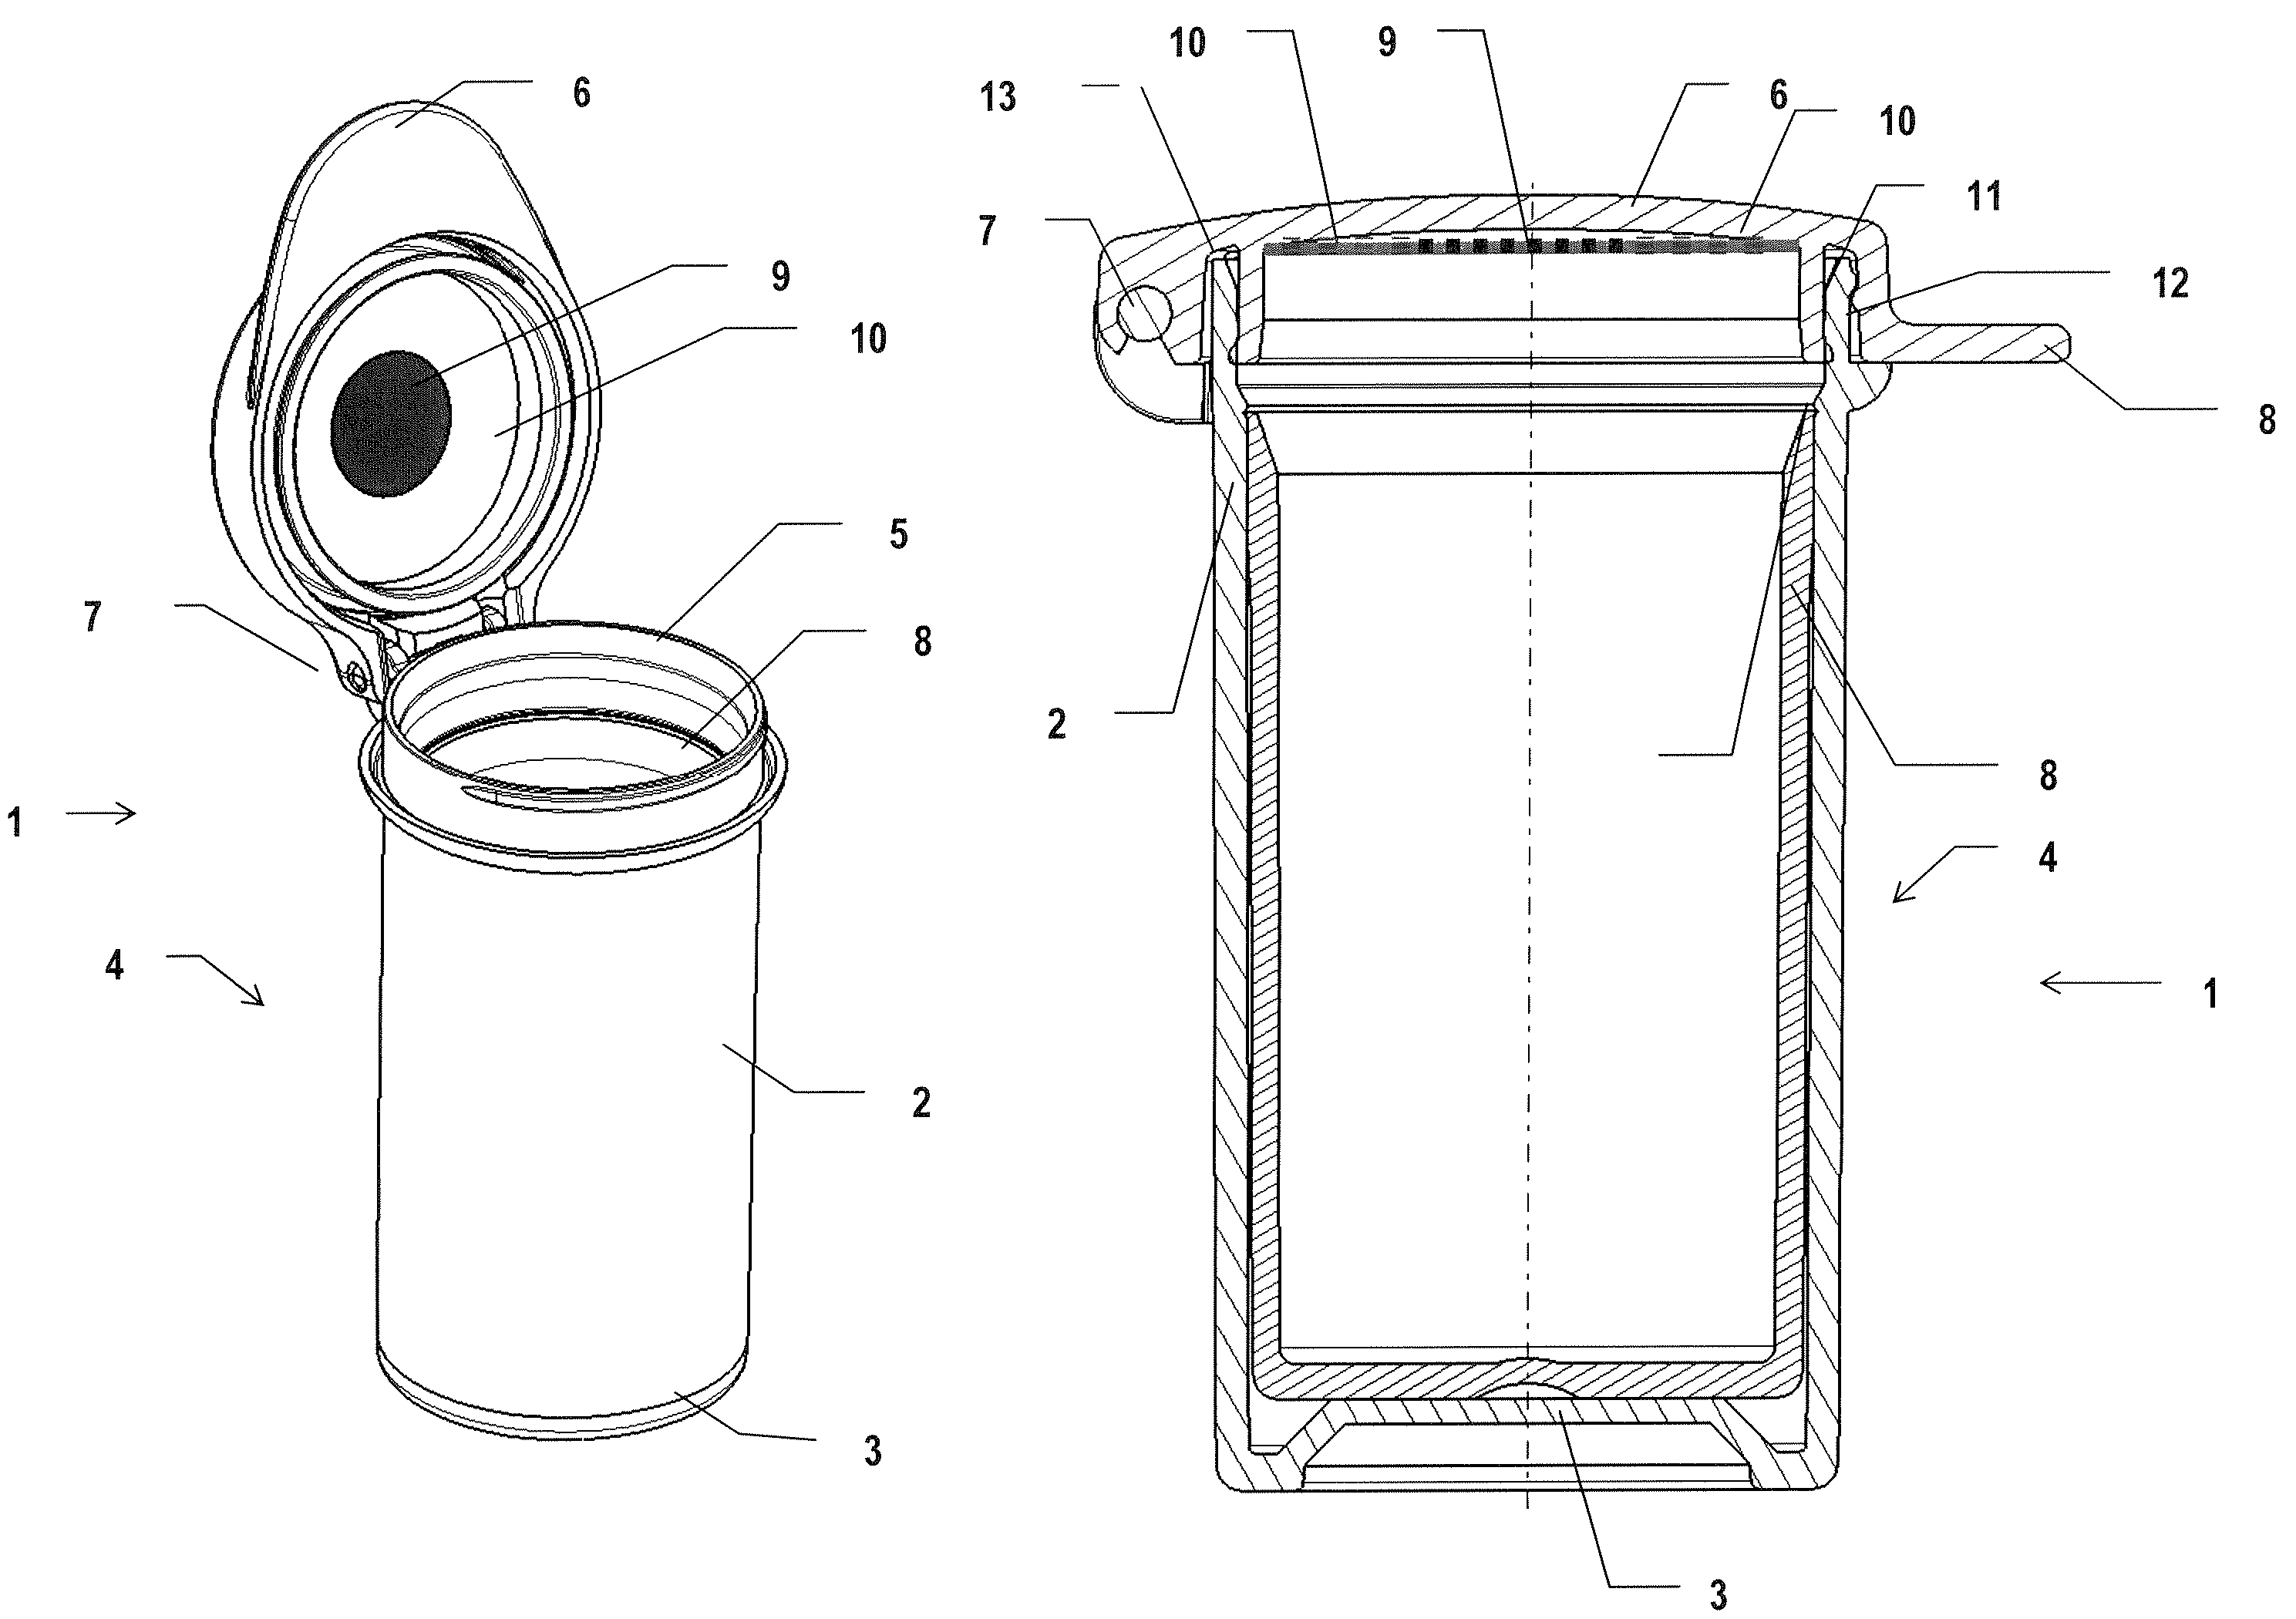 Dehydrating container comprising a humidity state indicator